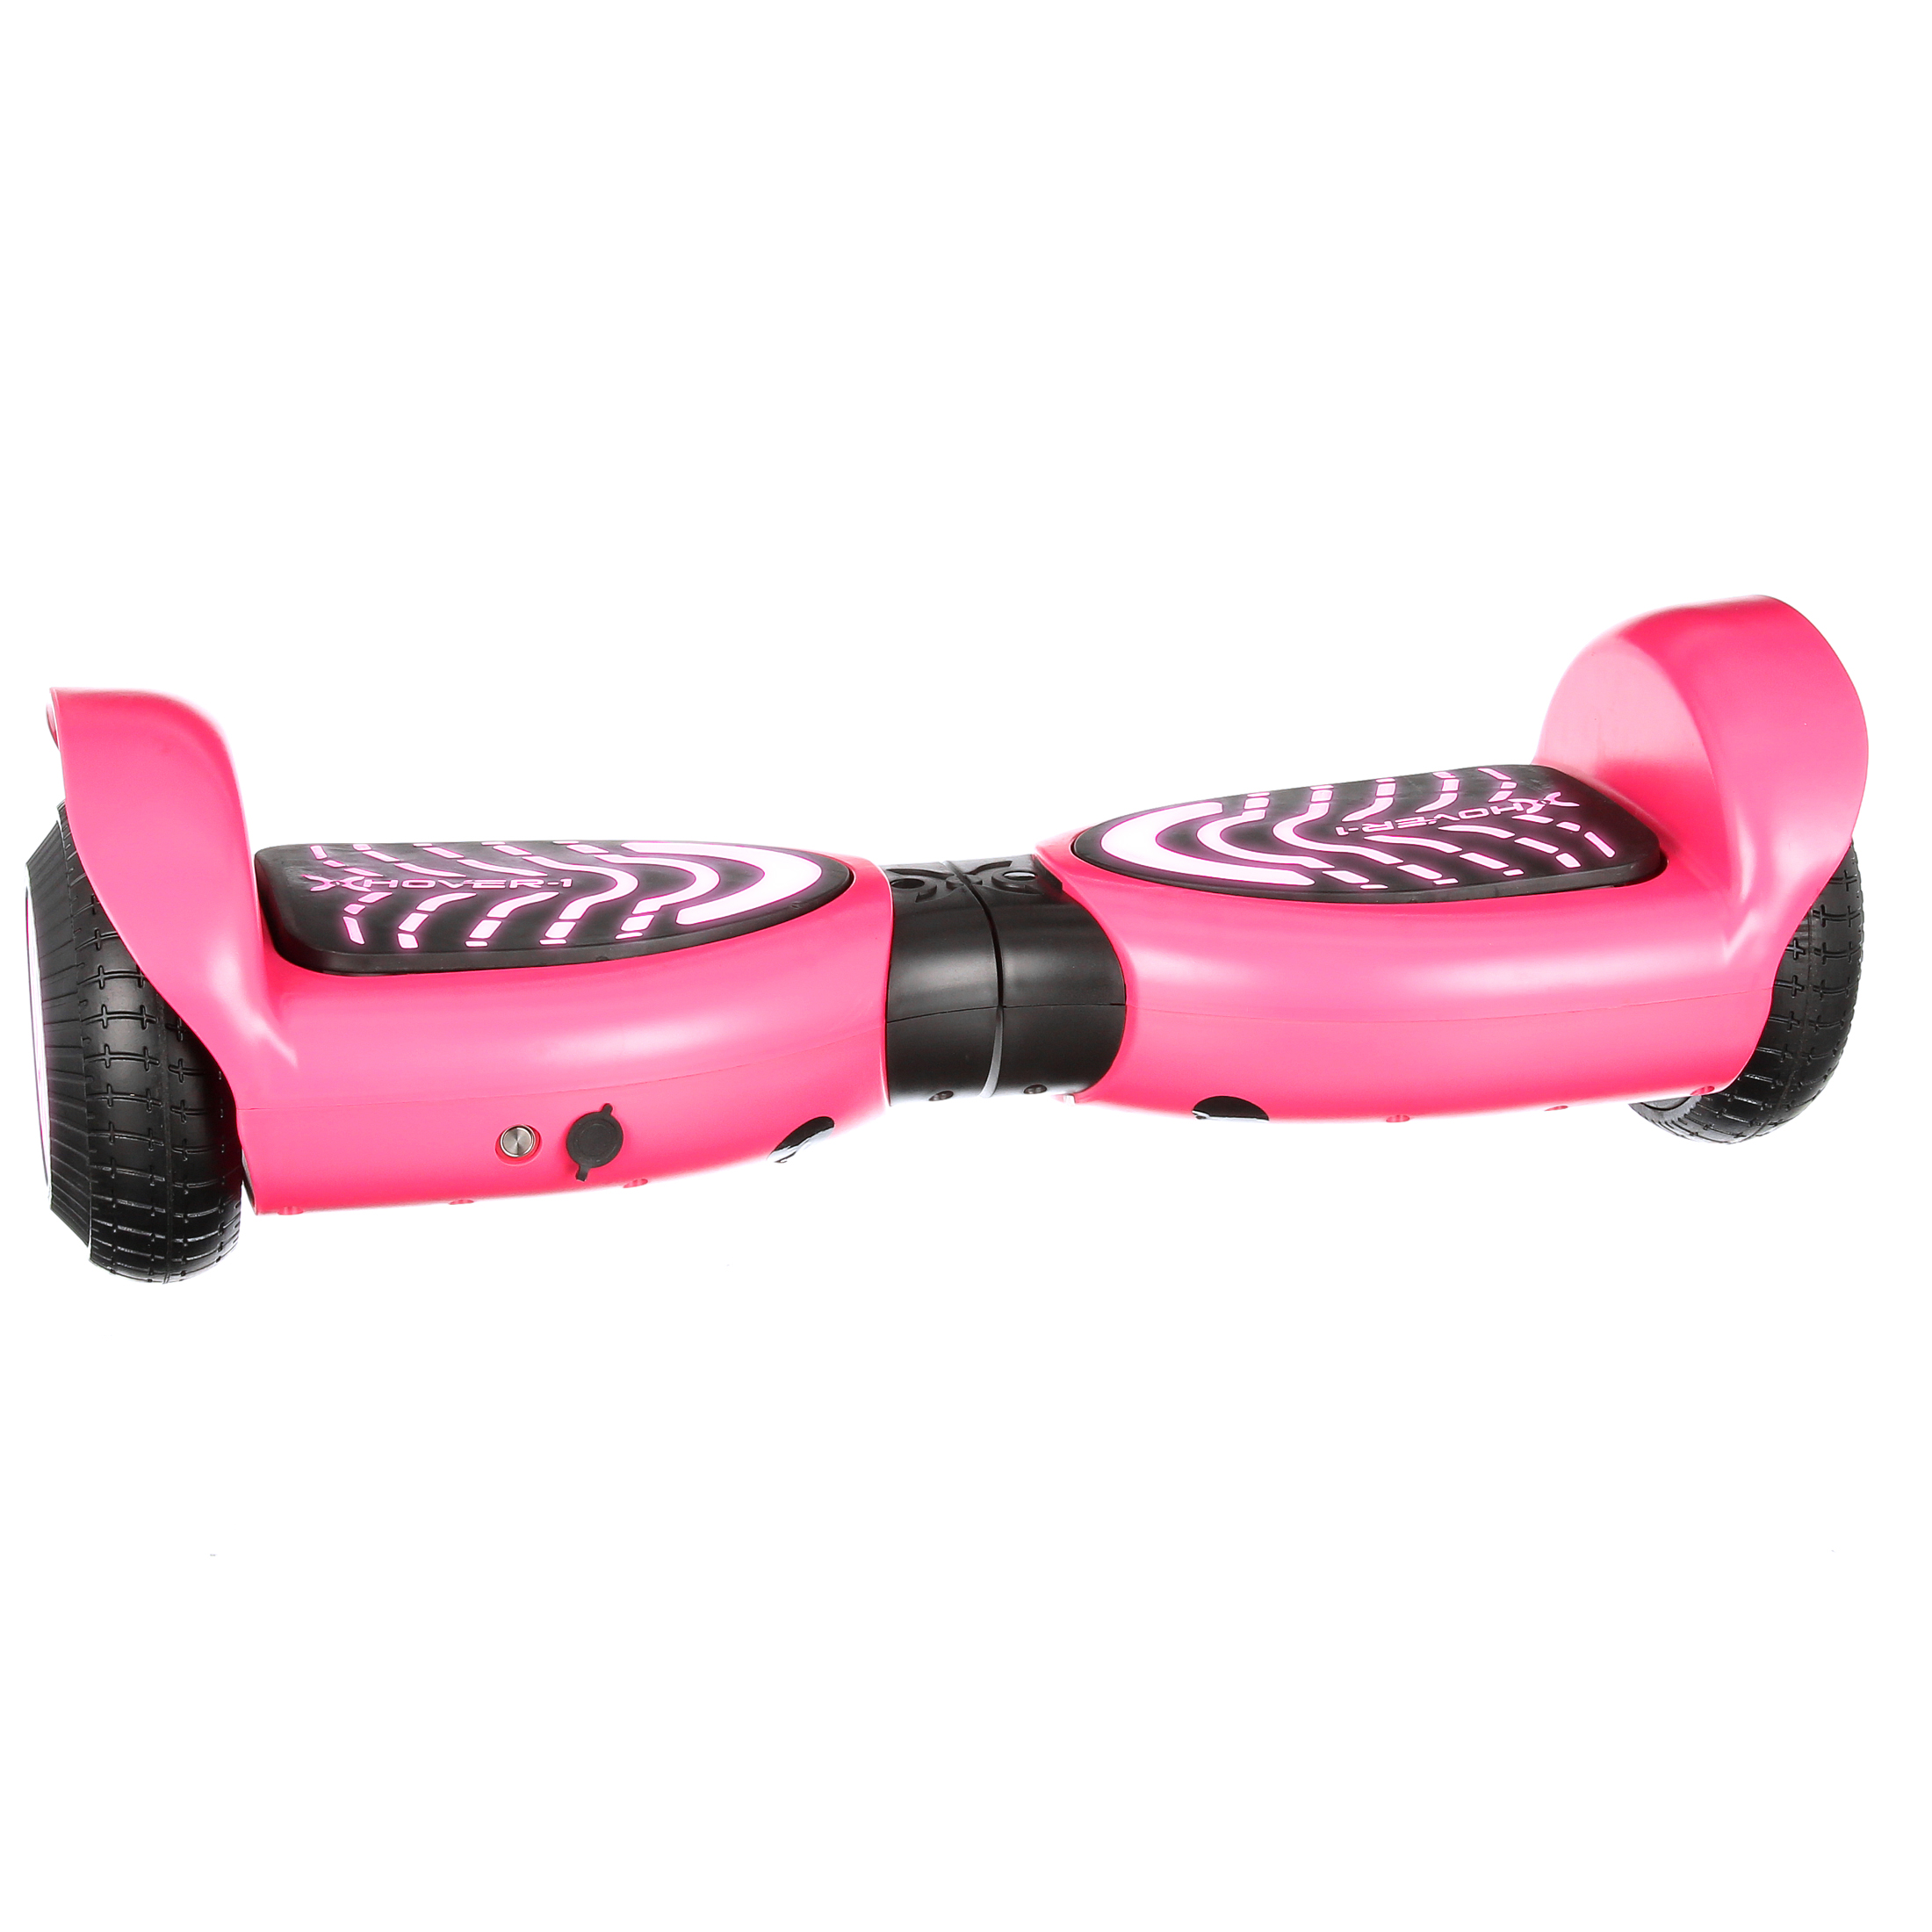 Hover-1 Rocket 2.0 Hoverboard, Pink, LED Max Weight 160 Lbs., Max Speed 7 Mph, Max Distance 3 Miles -